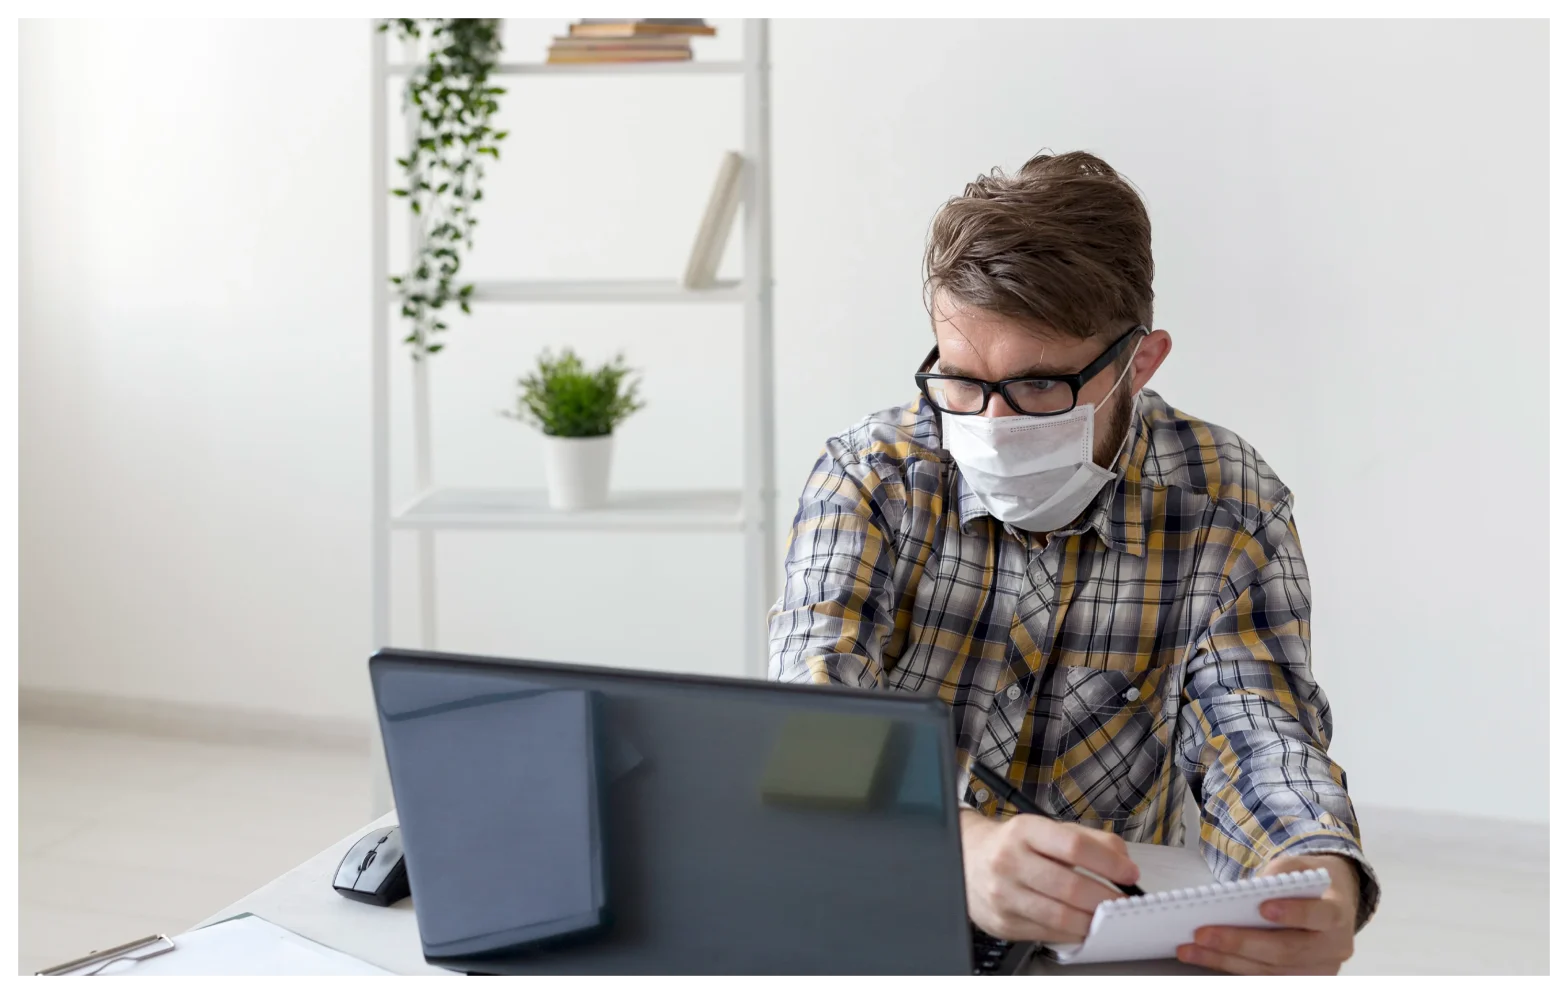 Coronavirus (COVID-19): 10 Steps To Work From Home Effectively